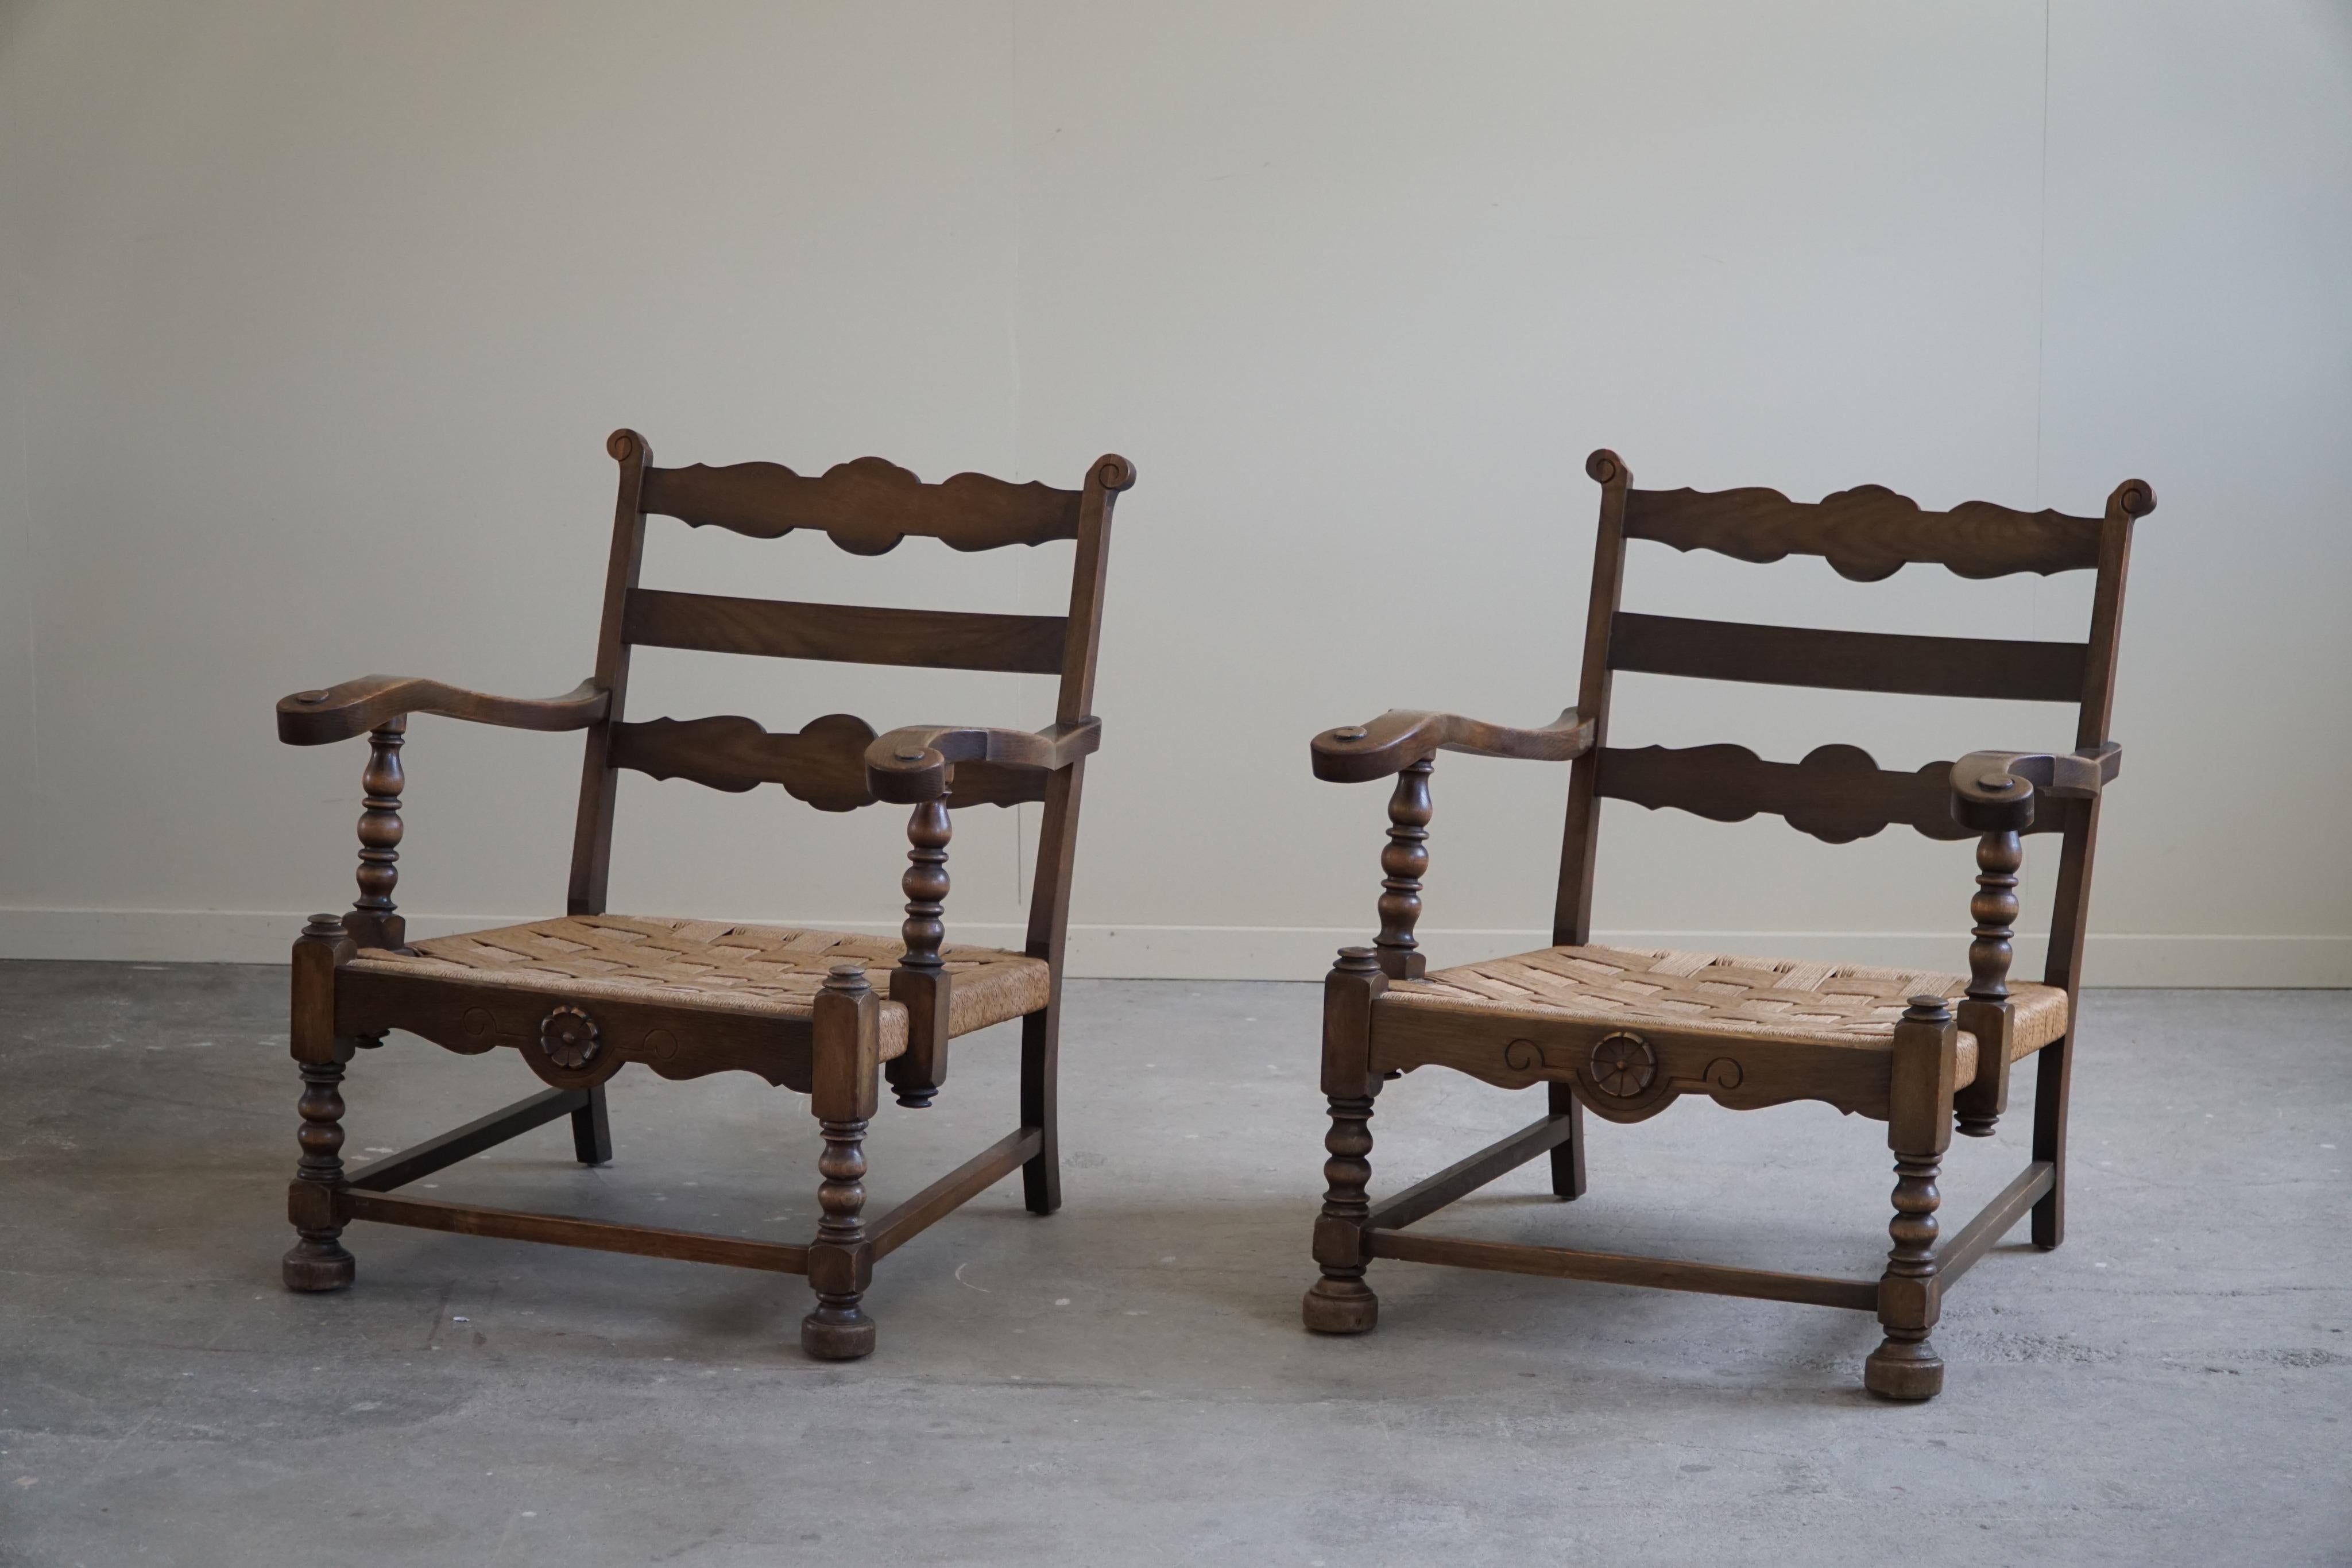 A Pair of Danish Modern, Sculptural Vintage Armchair in Oak and Papercord, 1940s For Sale 9